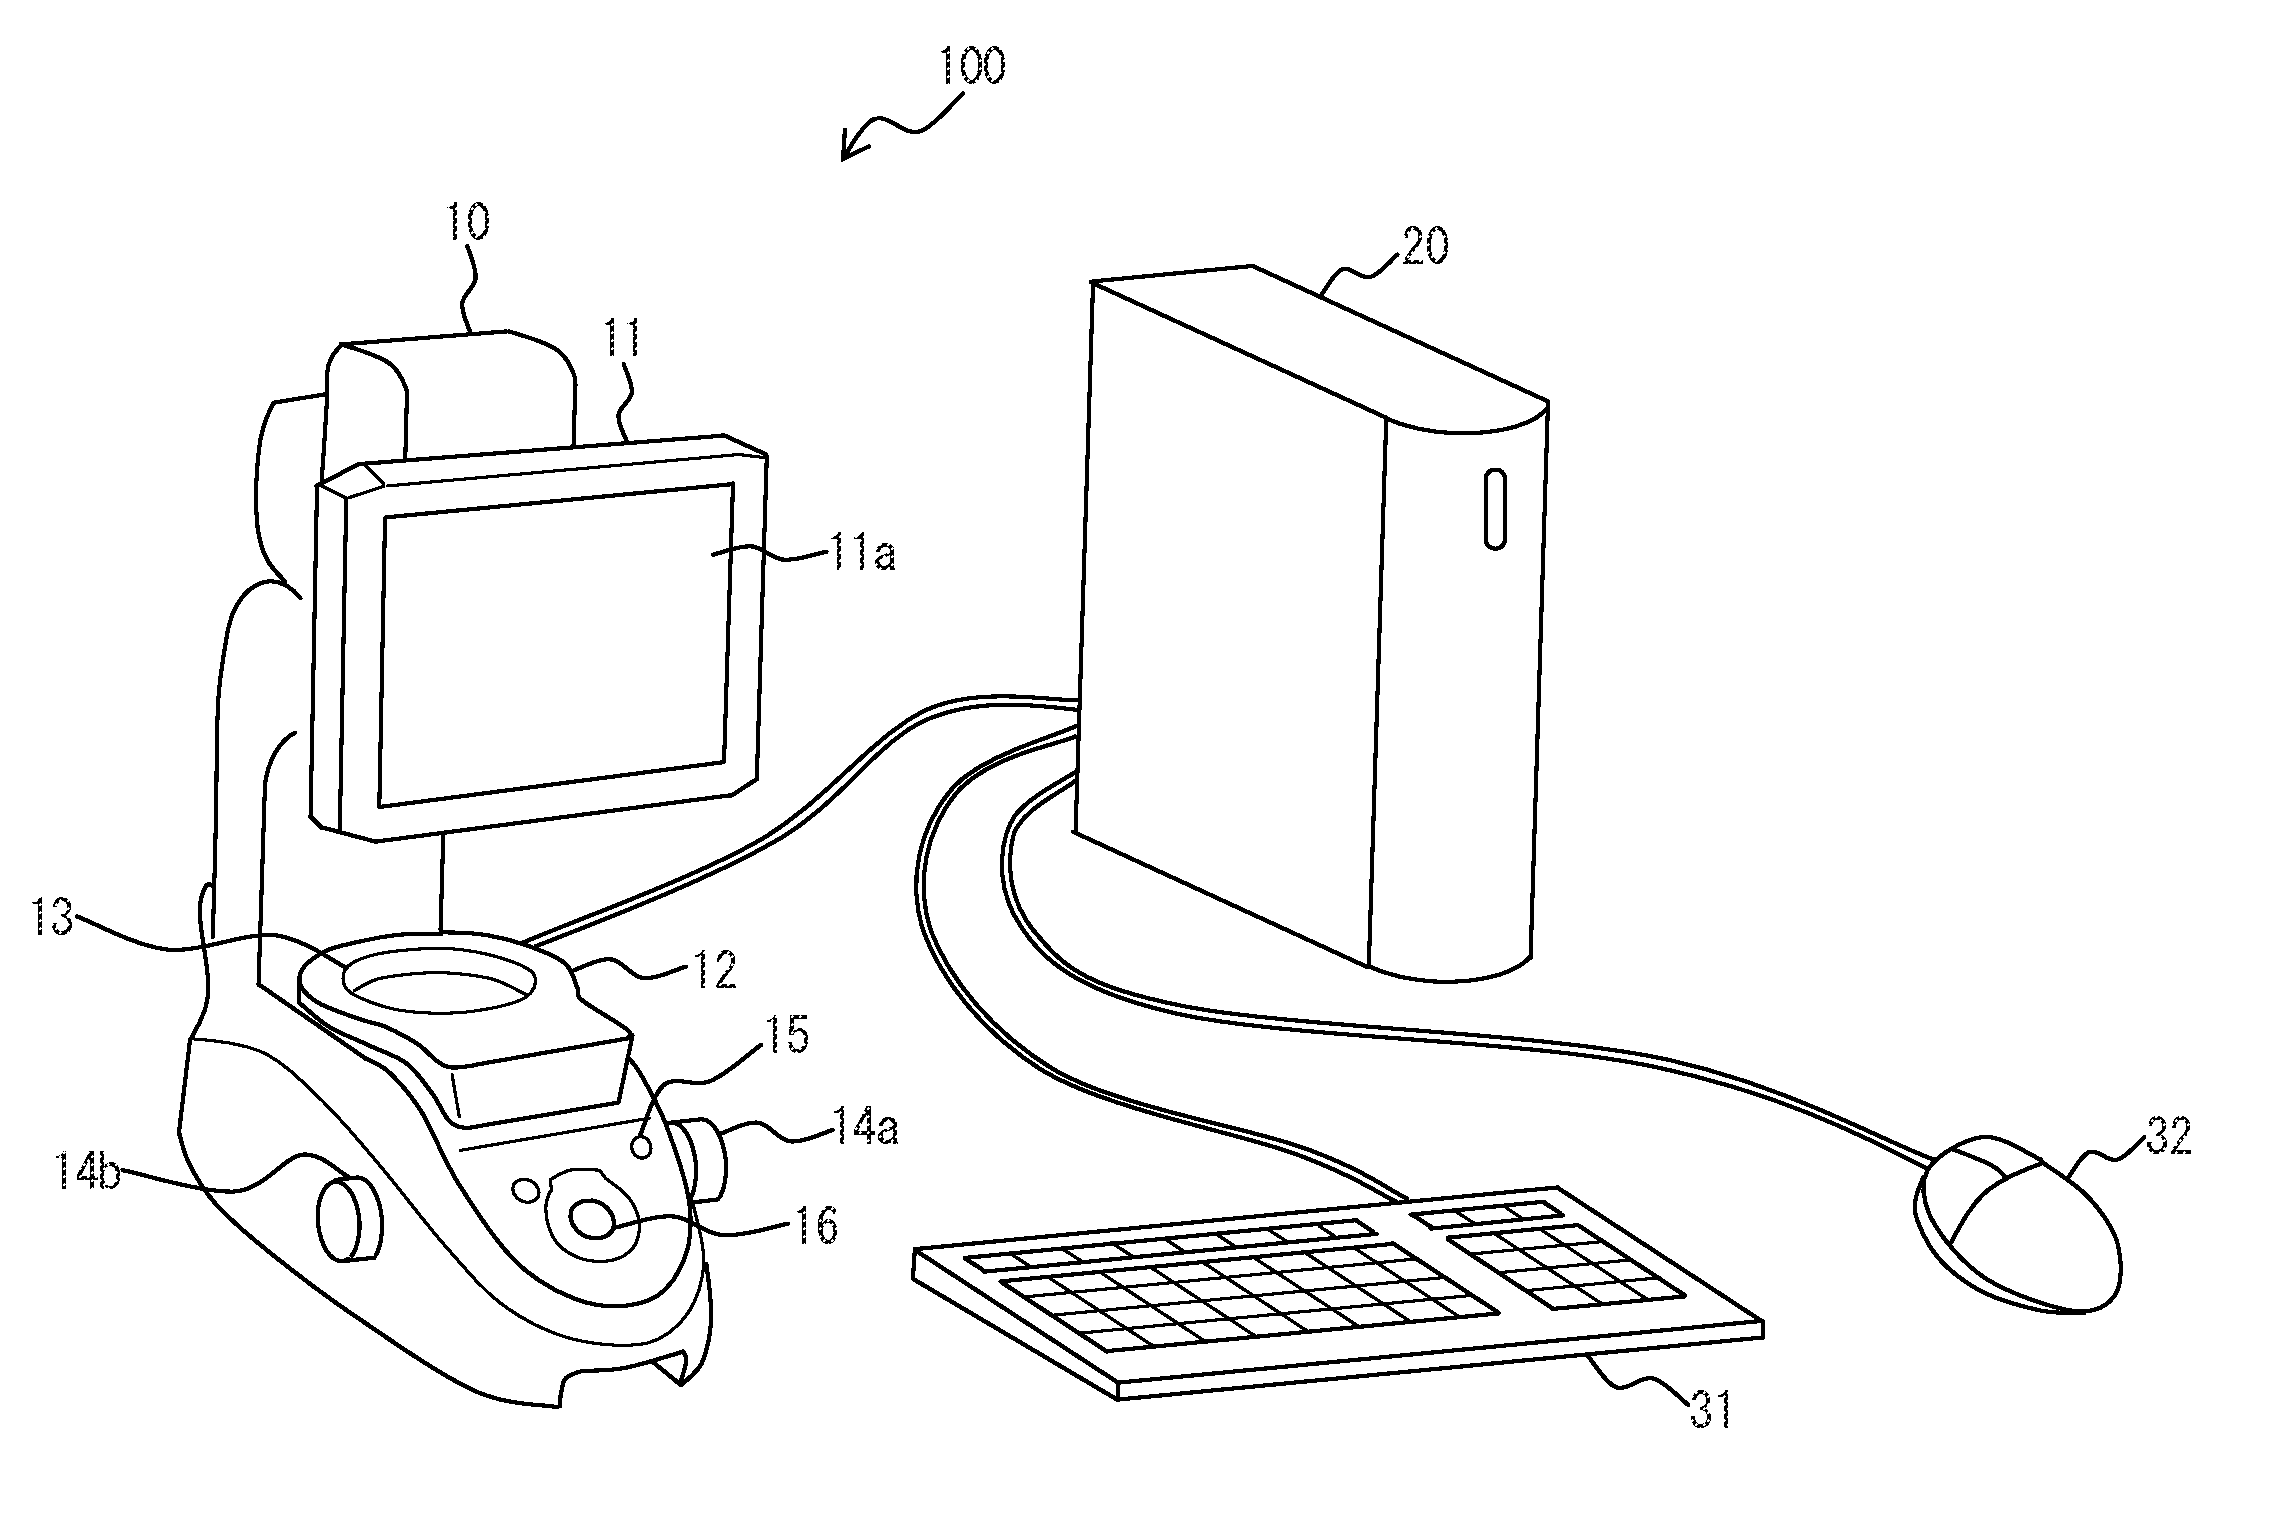 Image Measurement Device, Method For Image Measurement, And Computer Readable Medium Storing A Program For Image Measurement